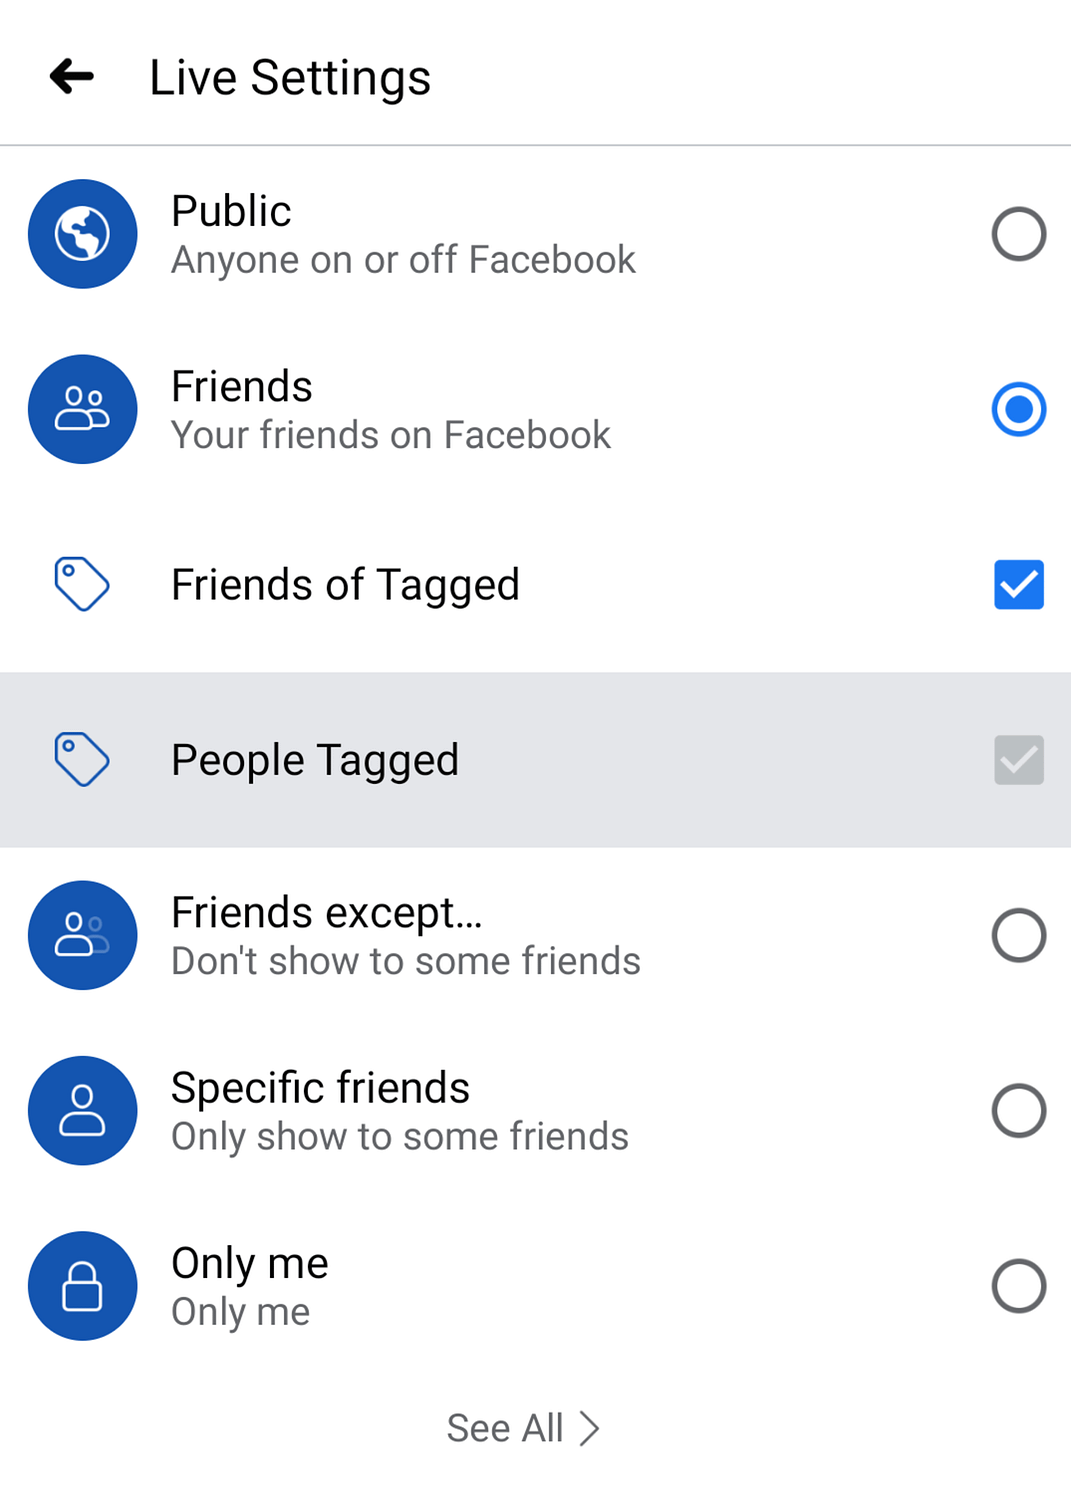 The Facebook Live privacy settings.